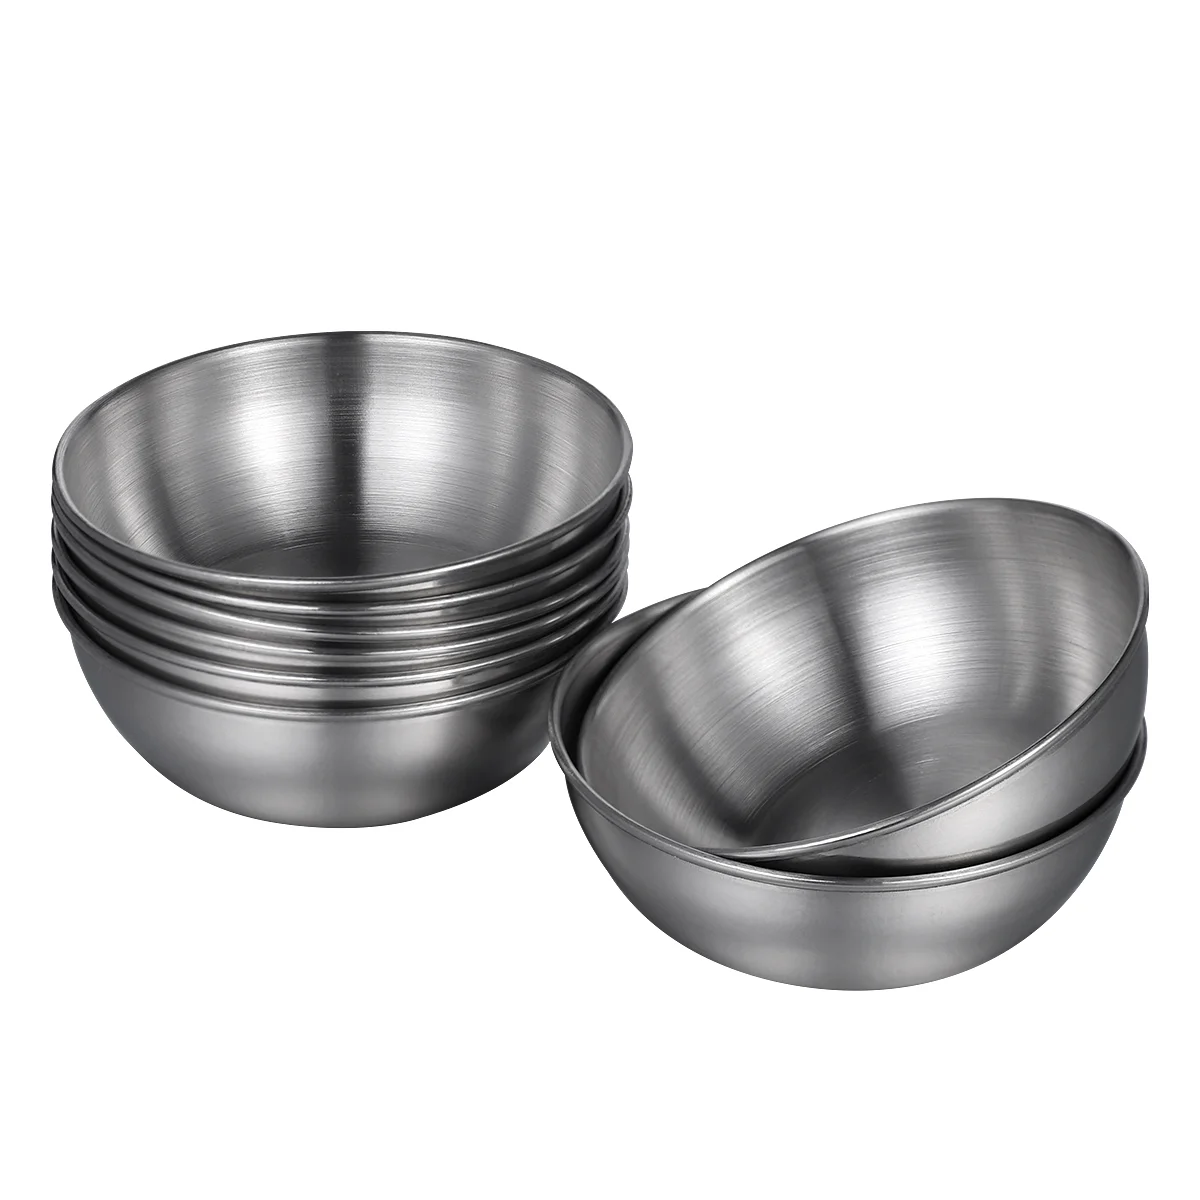 

Utensil Tray Condiment Cups Stainless Steel Bowls Appetizer Sauce Dipping Bowls Soy Sauce Dish Round Seasoning Dish Saucer